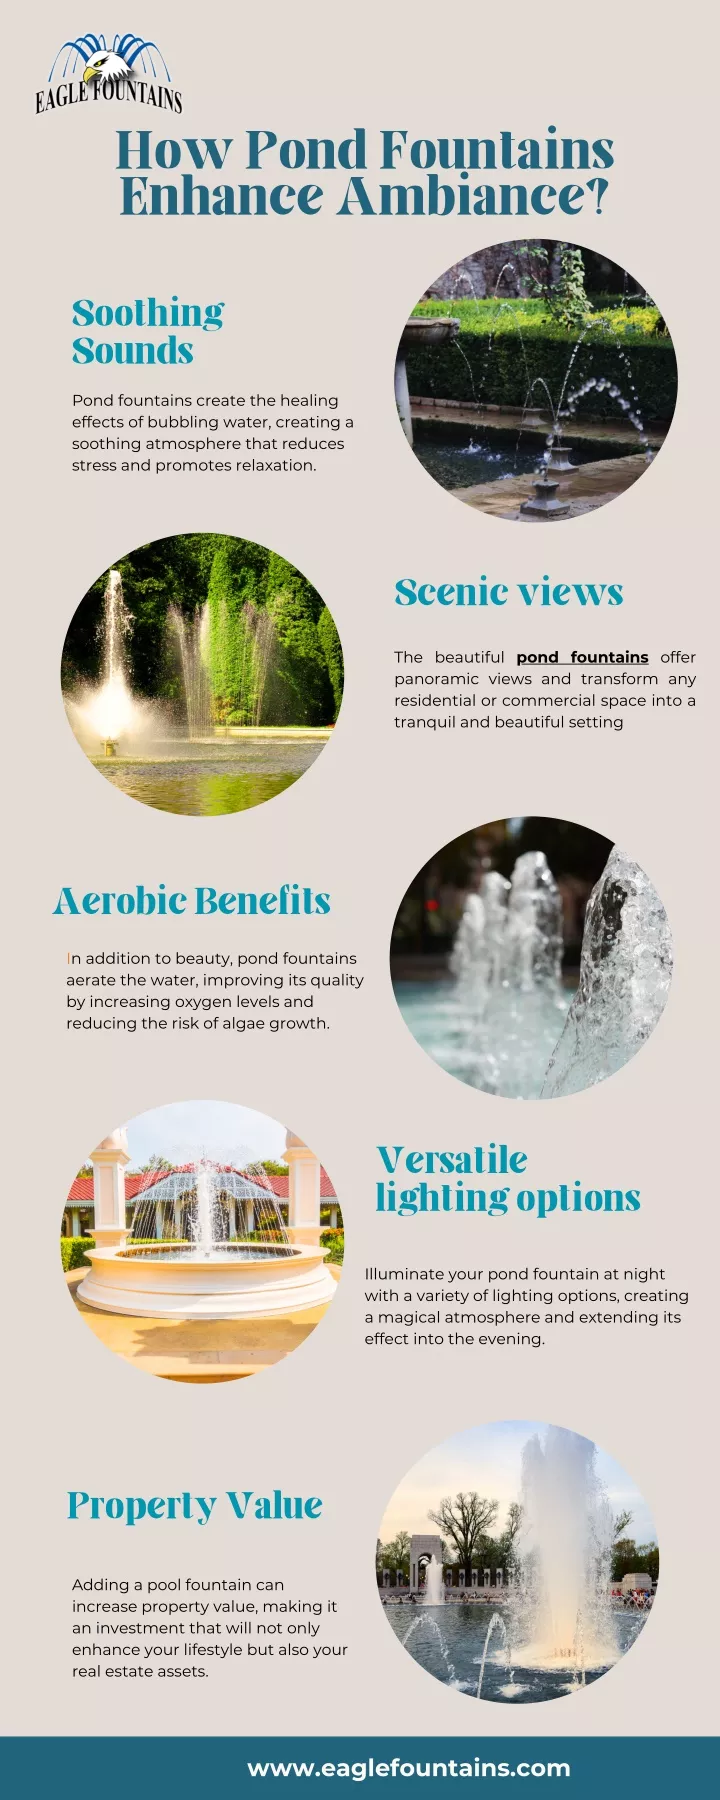 how pond fountains enhance ambiance